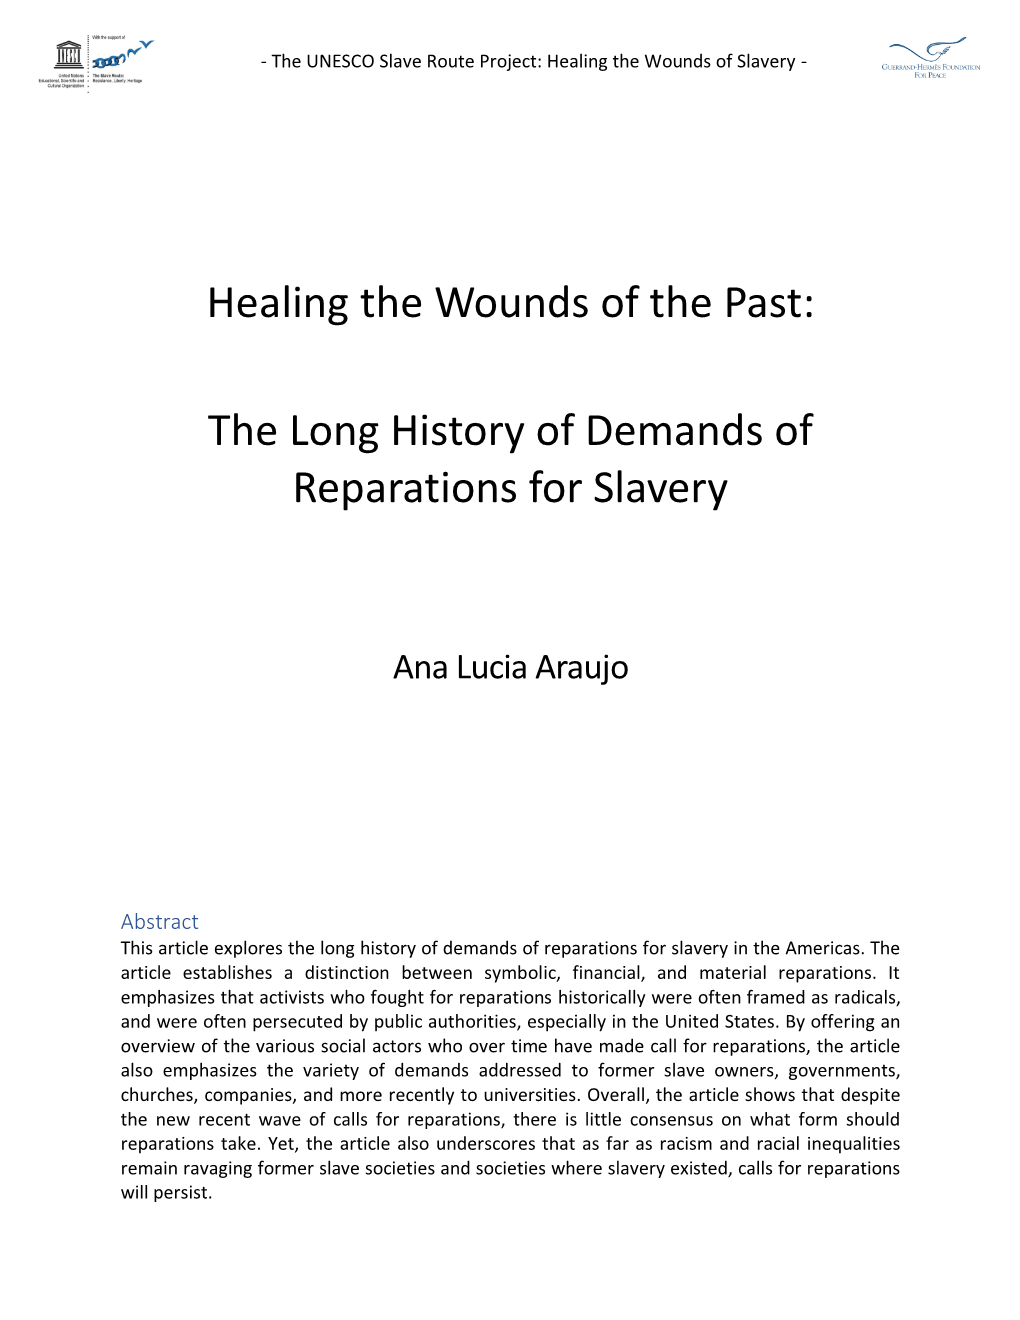 Healing the Wounds of the Past: the Long History of Demands of Reparations for Slavery